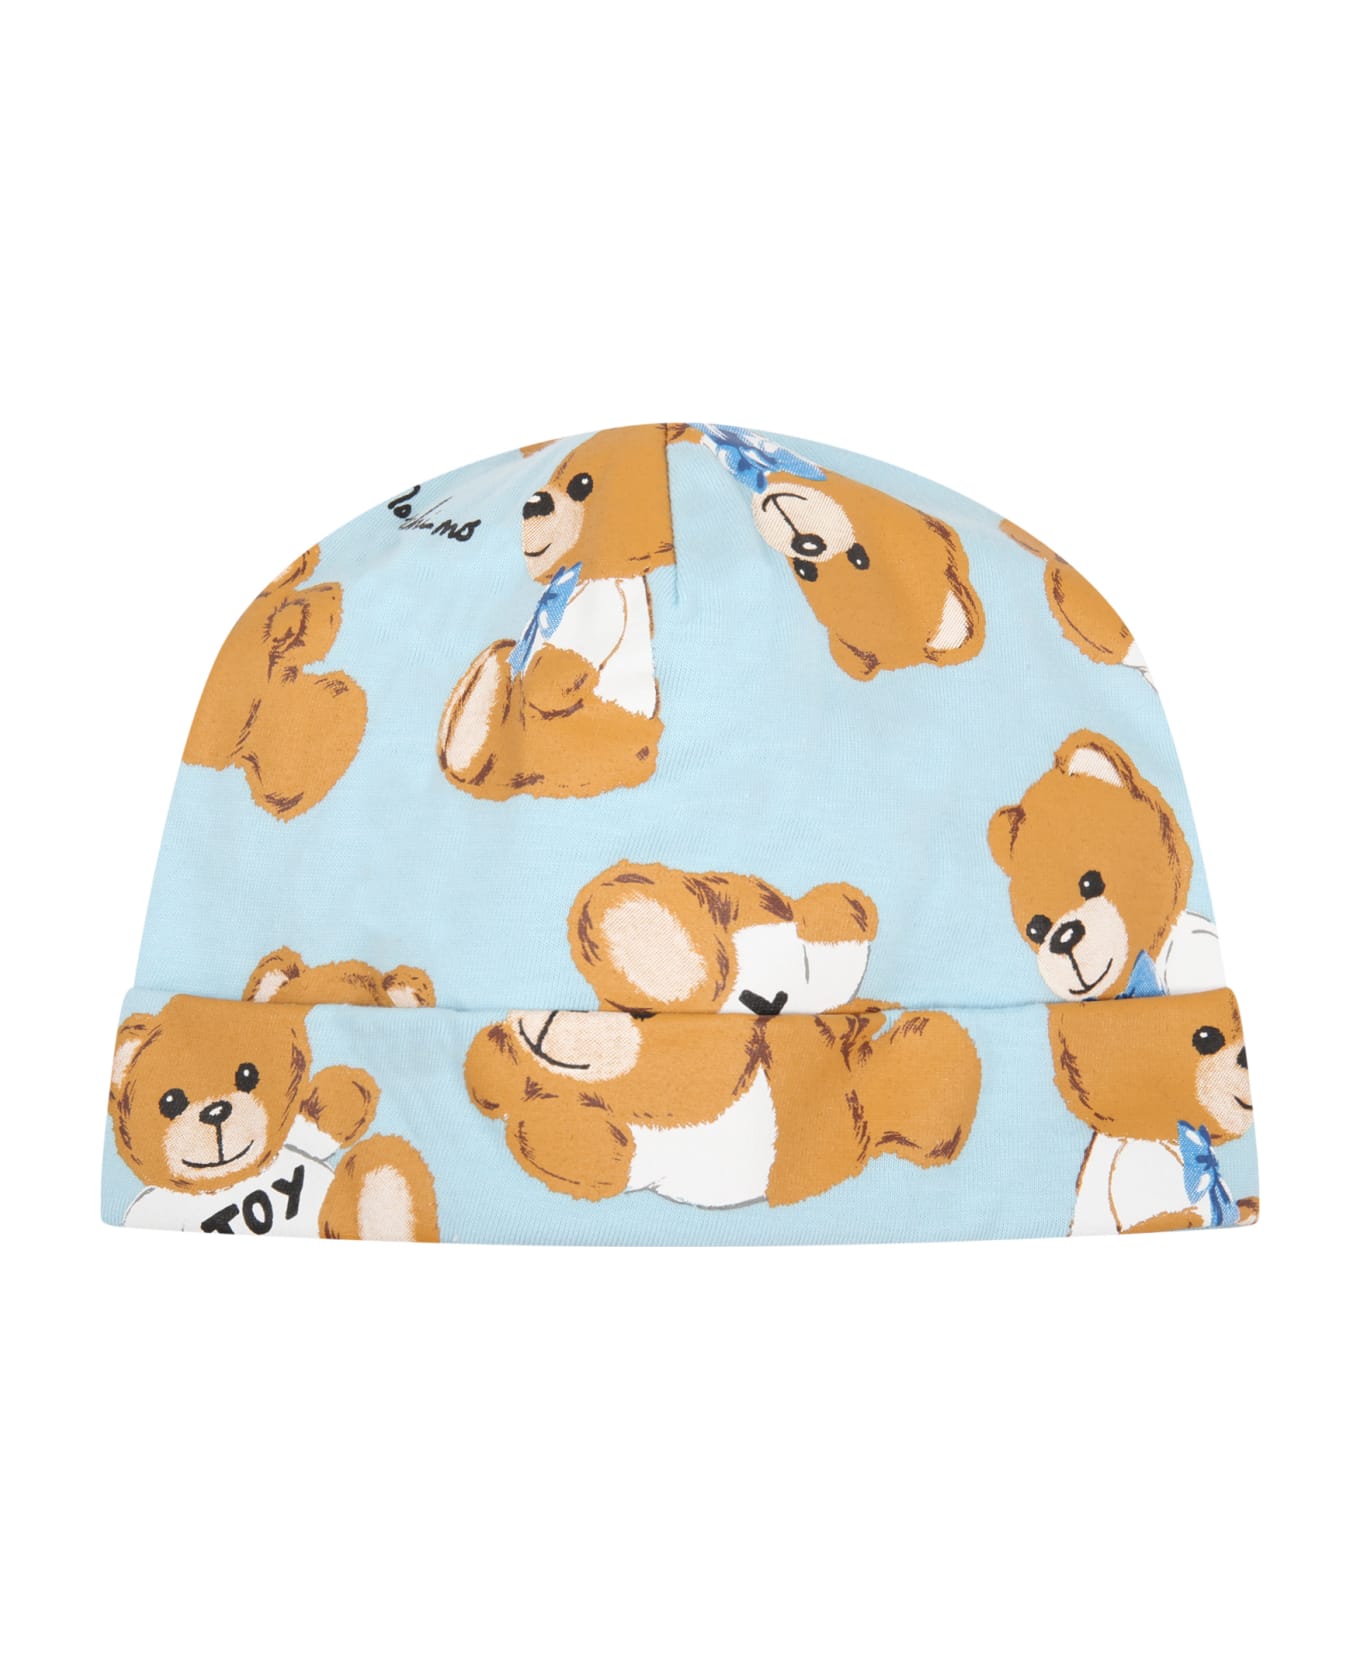 Moschino Multicolor Set For Baby Boy With Teddy Bears - Light Blue